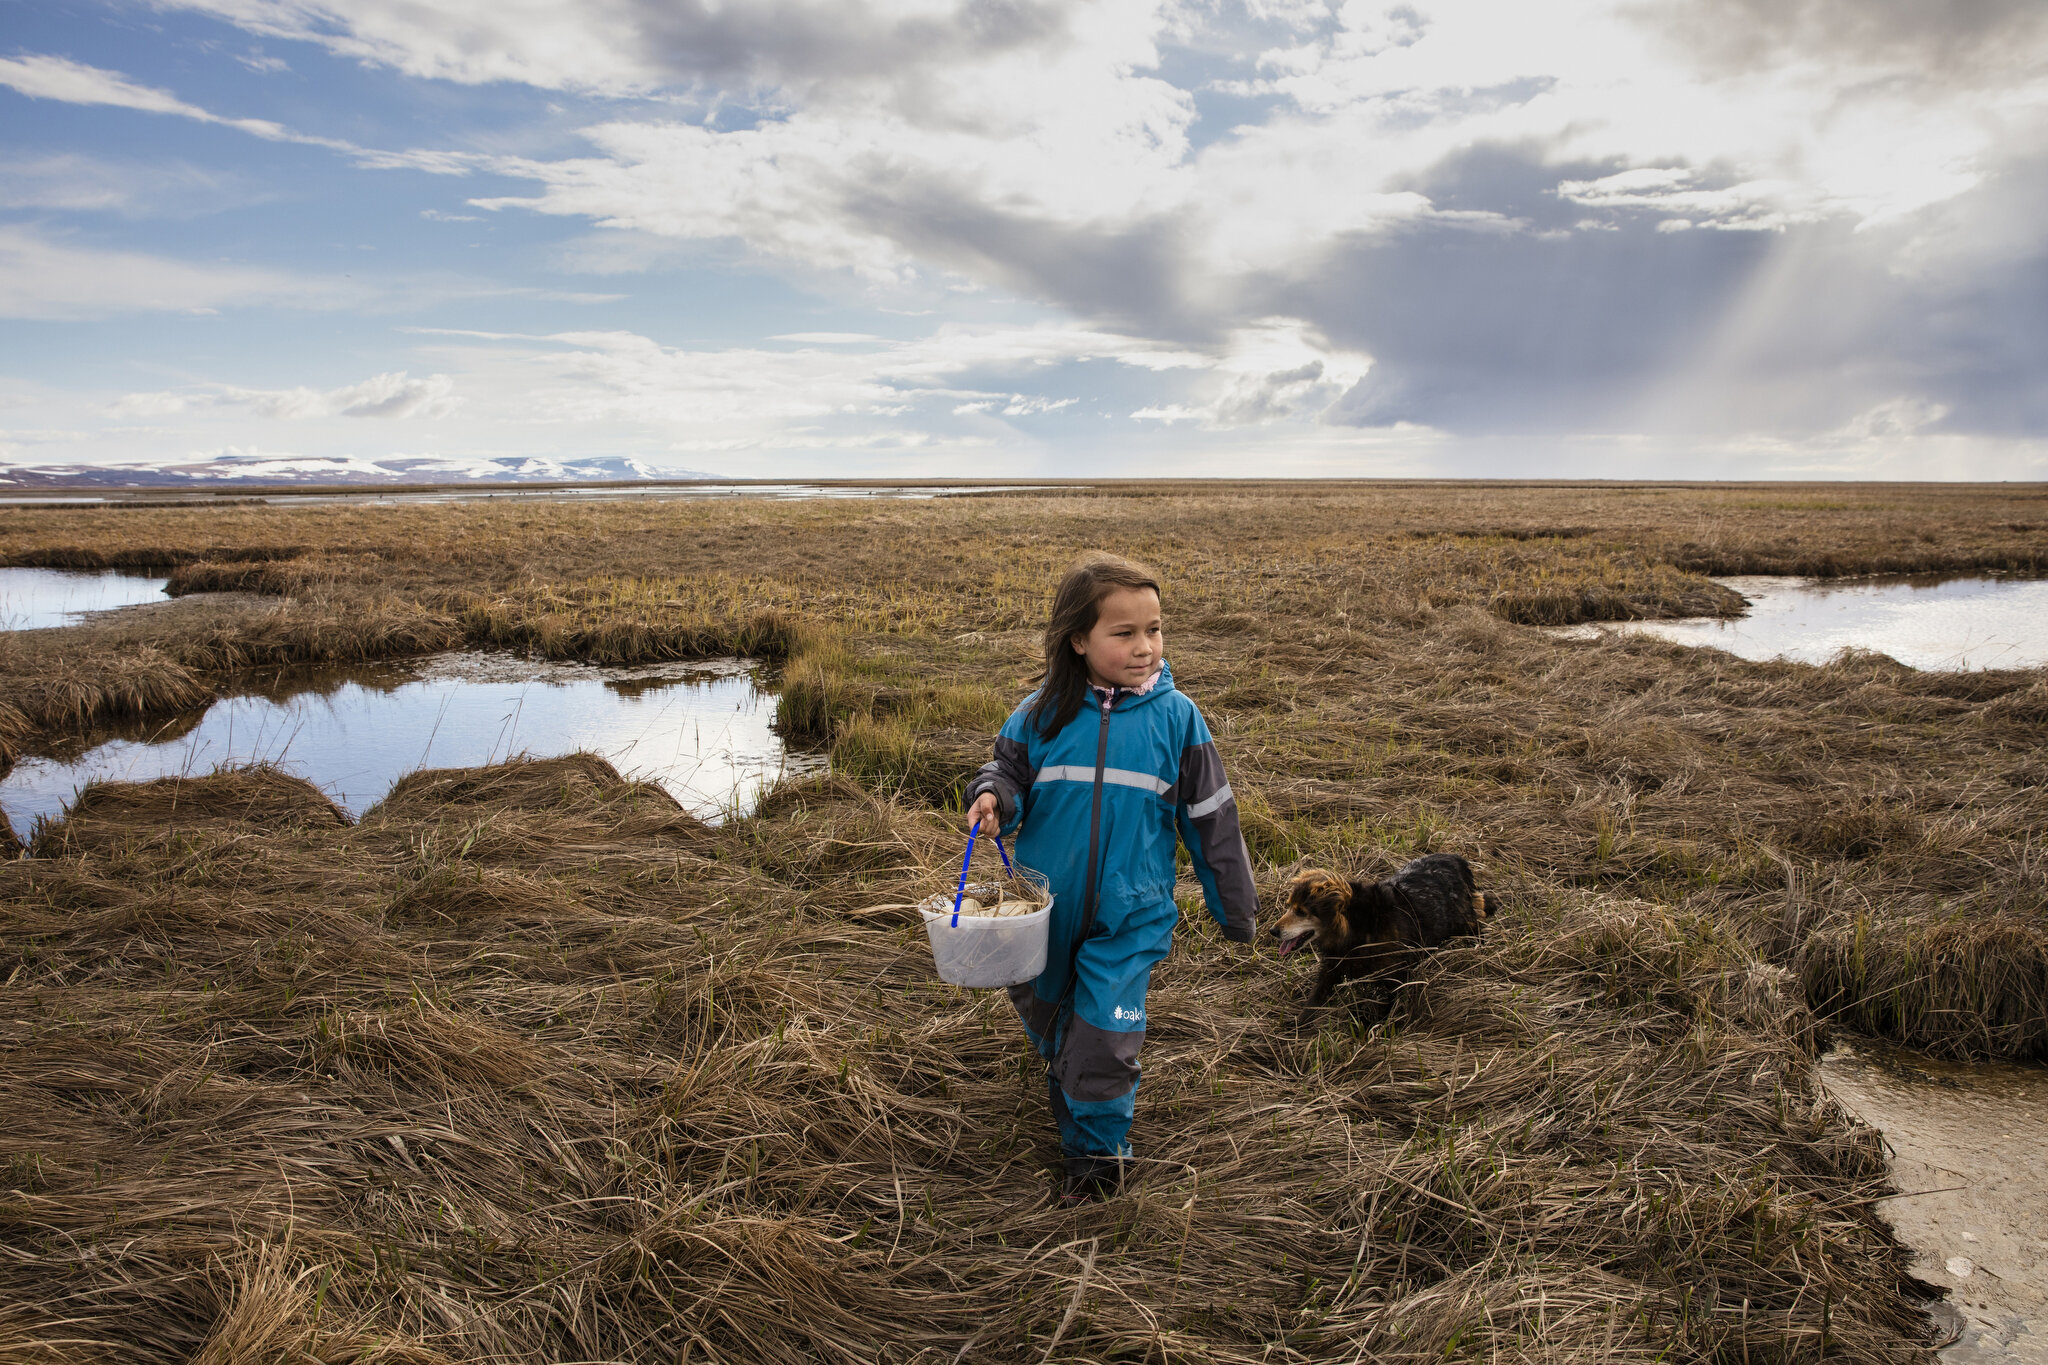  Kaleigh Charles collects goose eggs with her family along the Ninglick River in western Alaska. The Charles family live nearby in Newtok, a Yupik village of roughly 380 people. May 26th, 2019. Subsistence-based practices such as gathering eggs, hunt